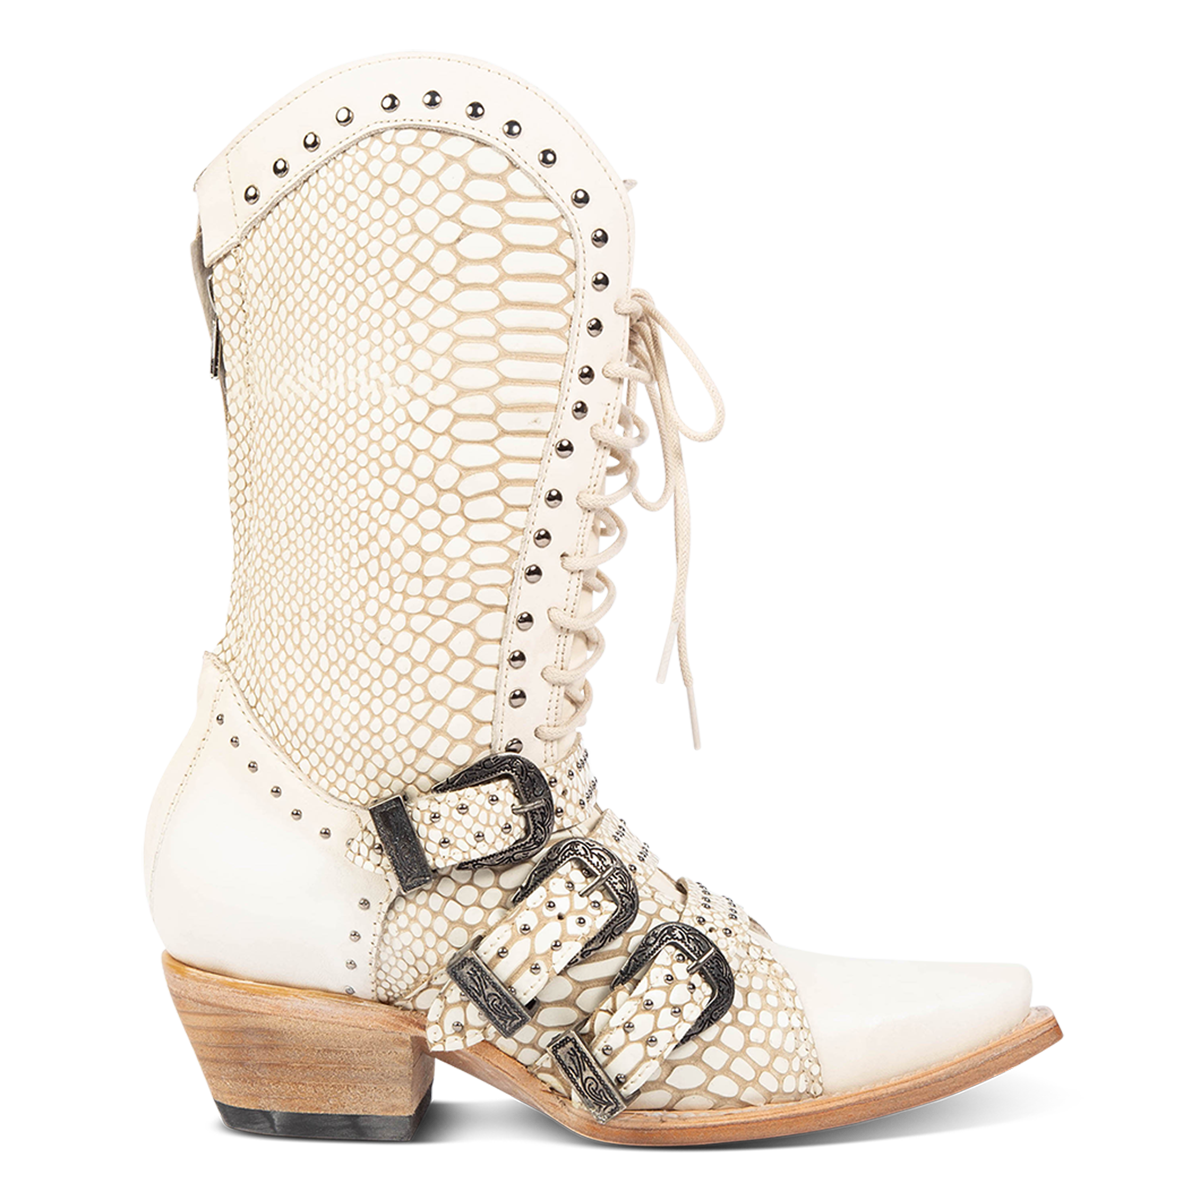 FREEBIRD women's Winnie white snake boot featuring a lace up shaft, leather accents, and a back brass zip closure